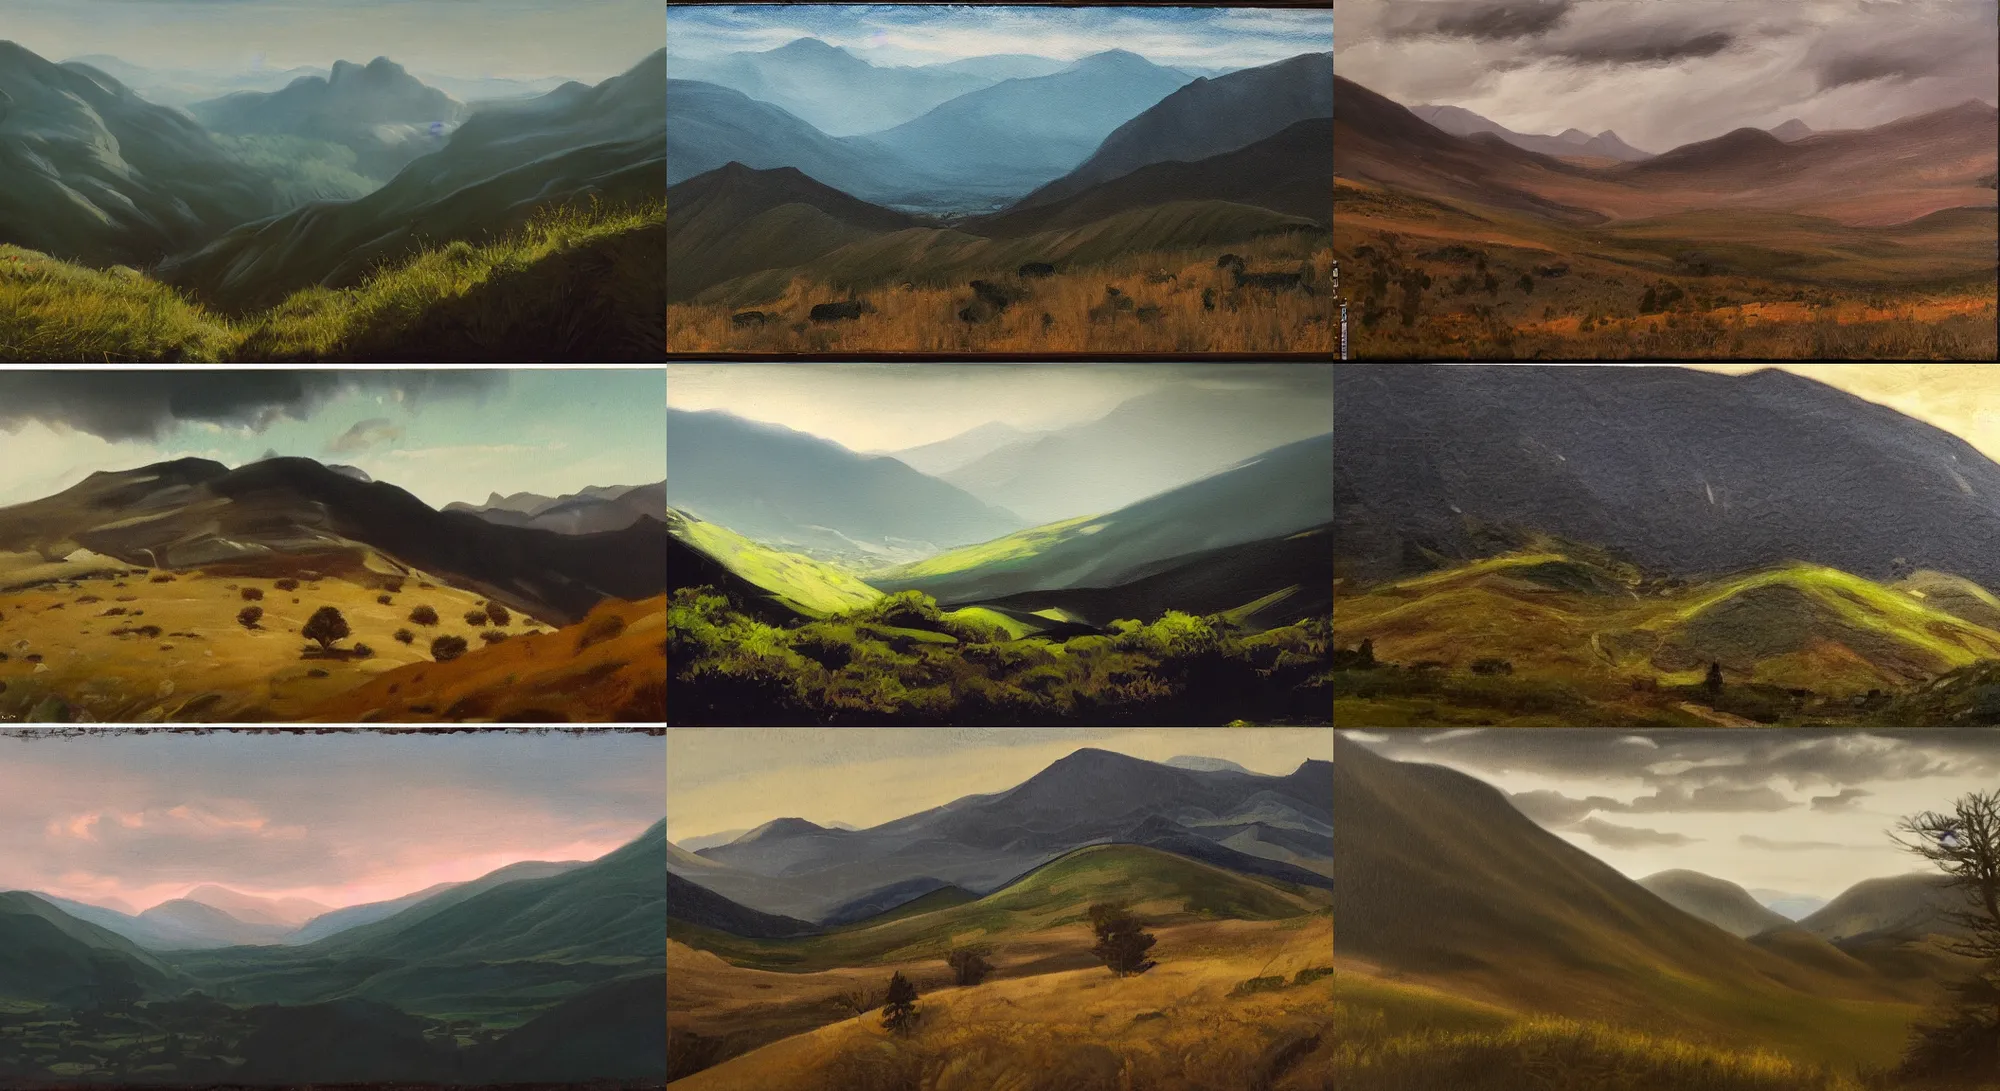 Prompt: dark mood, hills and mountains, shot from danis villeneuve movie, roger deakins filming, nightfall, painting in the style of frederick judd waugh and josh clare